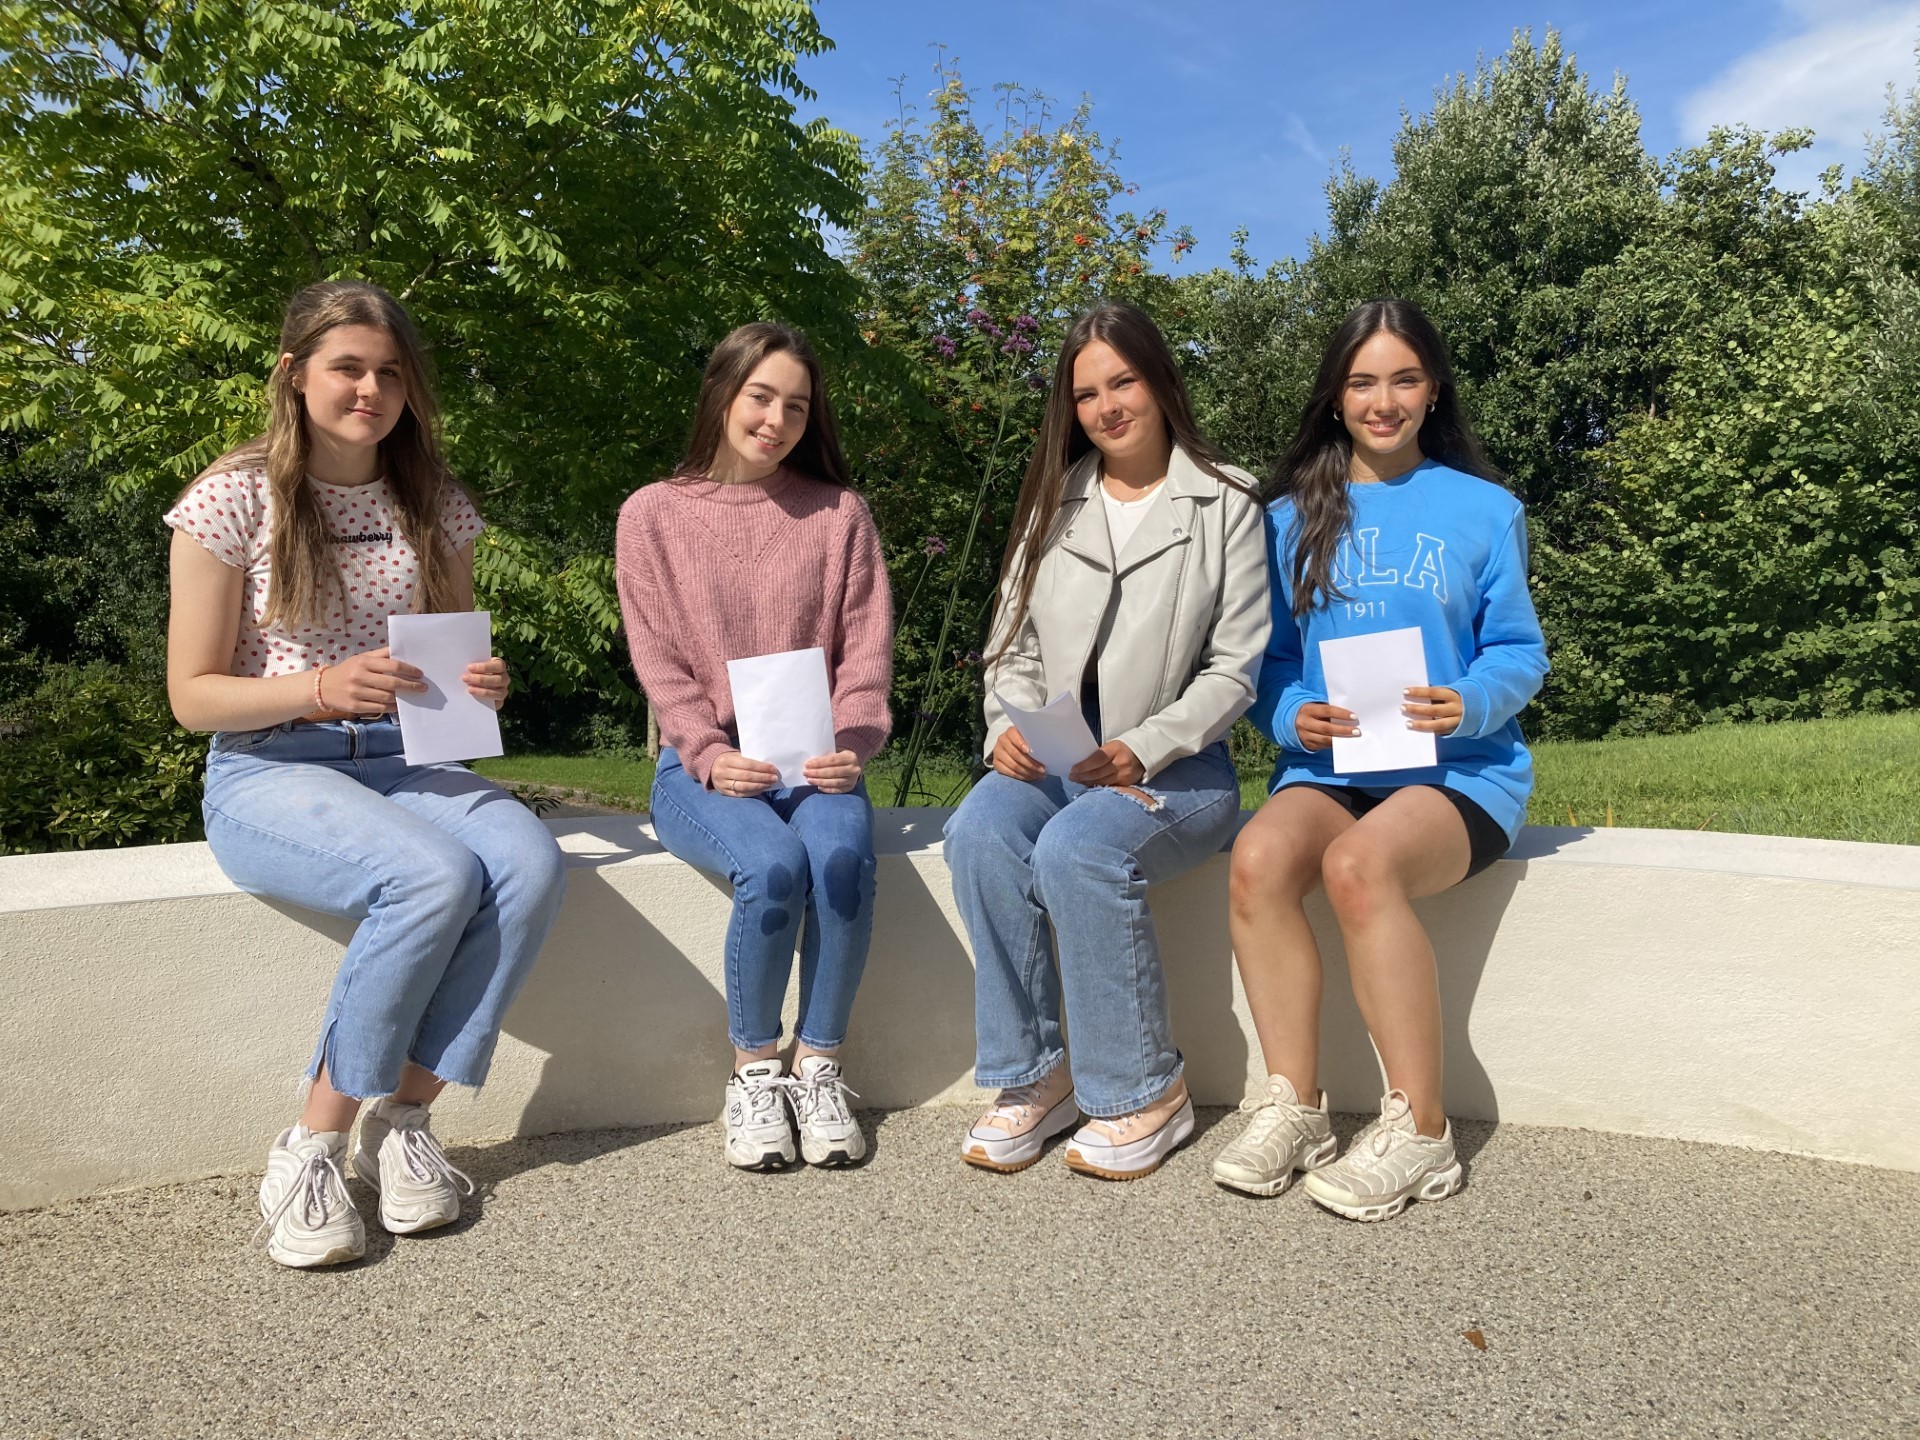 St. Fancheas College students receiving their A-Level results: Pictured from left: Erin Reilly, Alisha McCabe, Ellie Howe and Sadhbh McAleer.